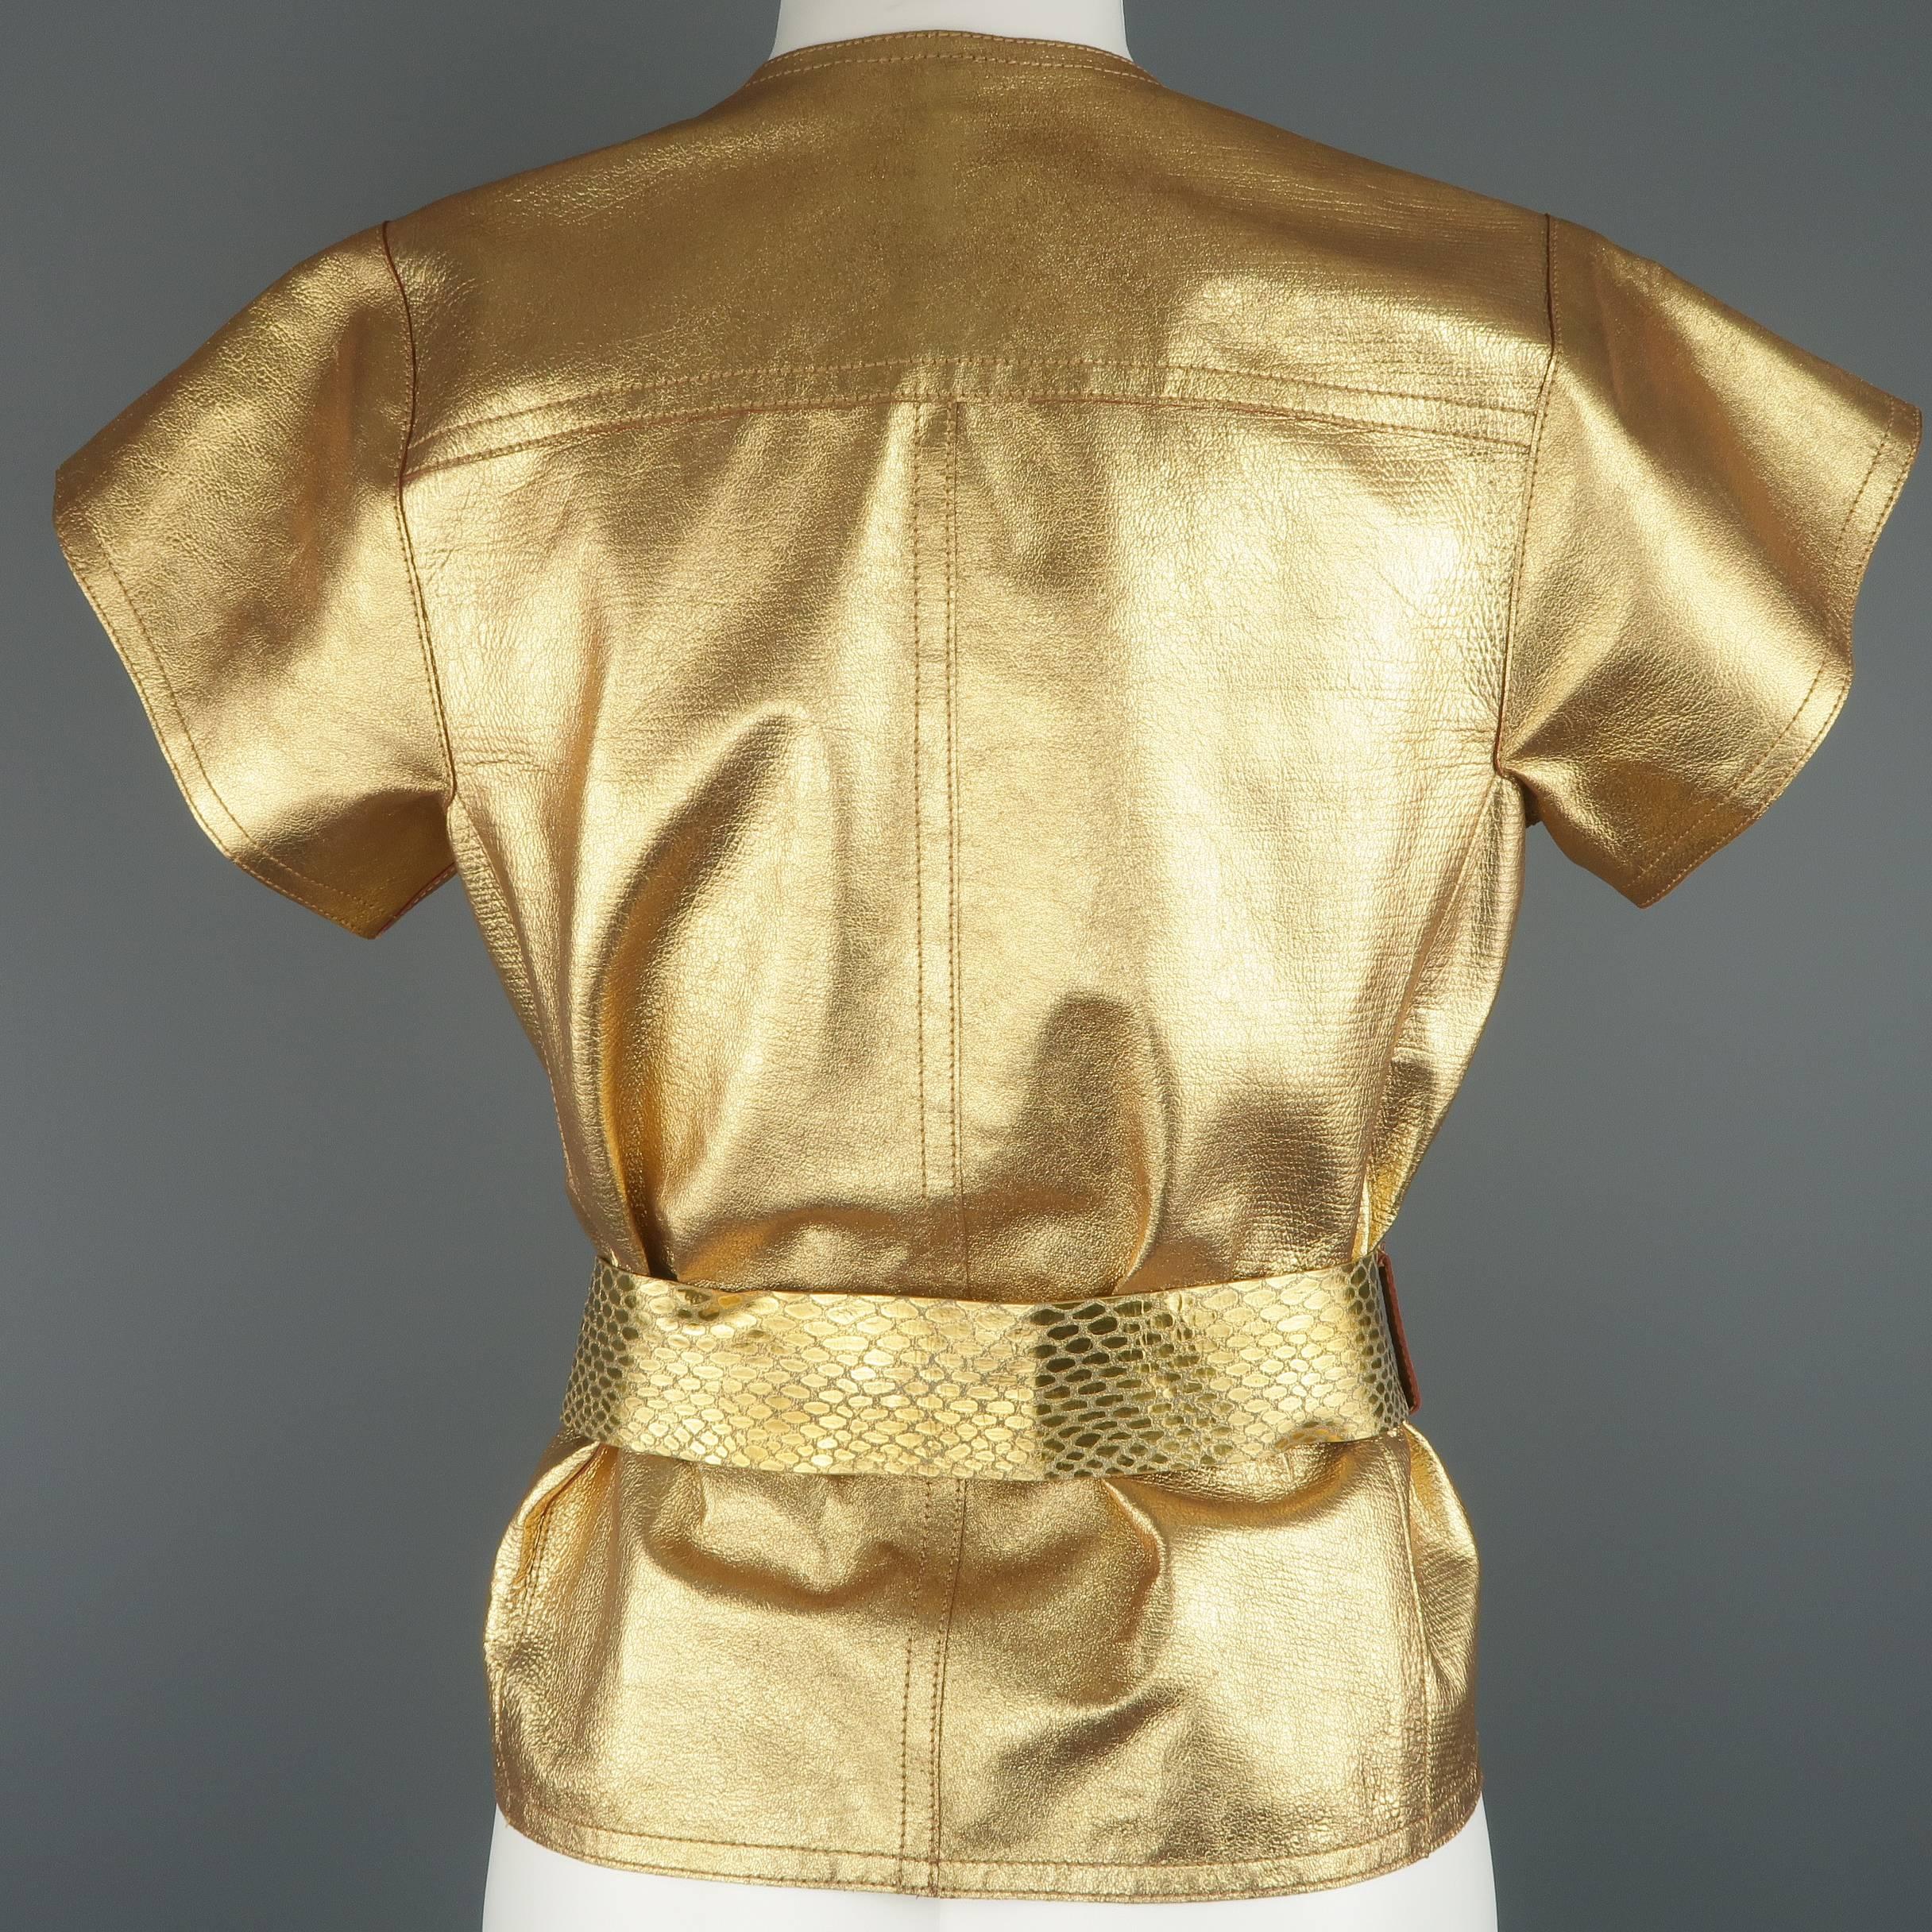 Marc Jacobs Gold Leather Wrap Flower Belt Blouse Top, Spring 2011 Runway  2